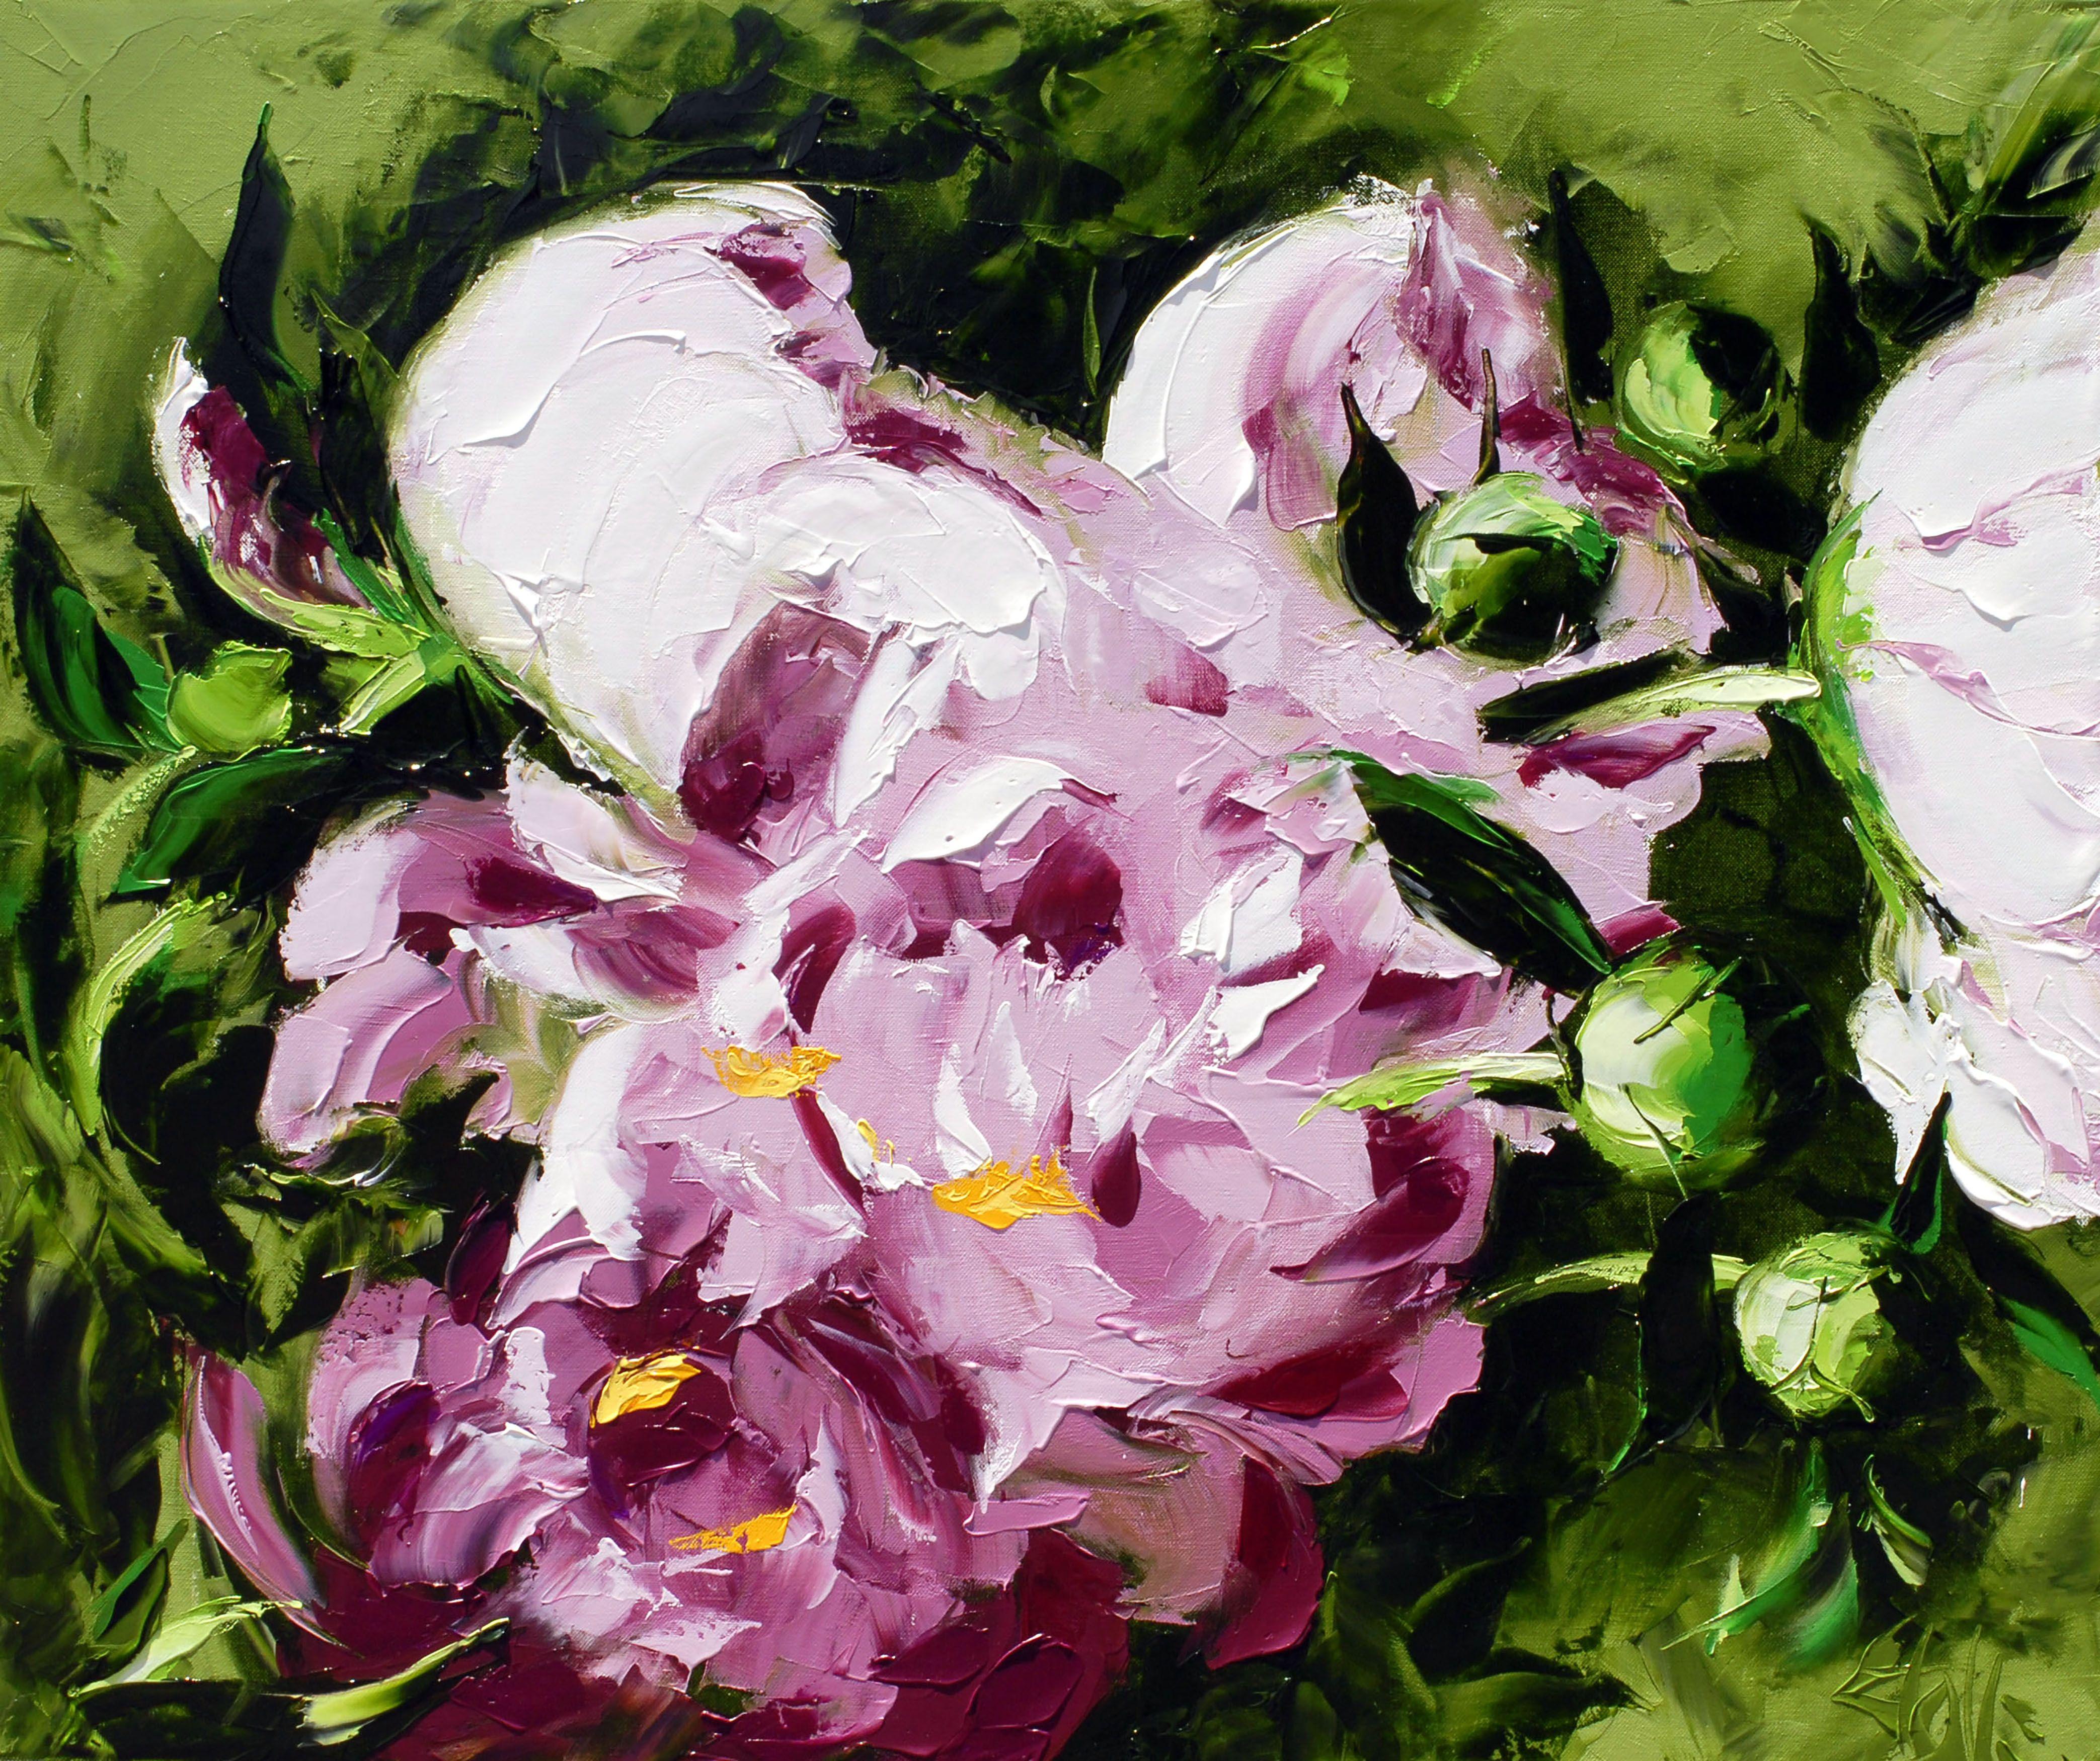 The composition didn't start off-balance but the peonies saw it differently. :: Painting :: Impressionist :: This piece comes with an official certificate of authenticity signed by the artist :: Ready to Hang: Yes :: Signed: Yes :: Signature